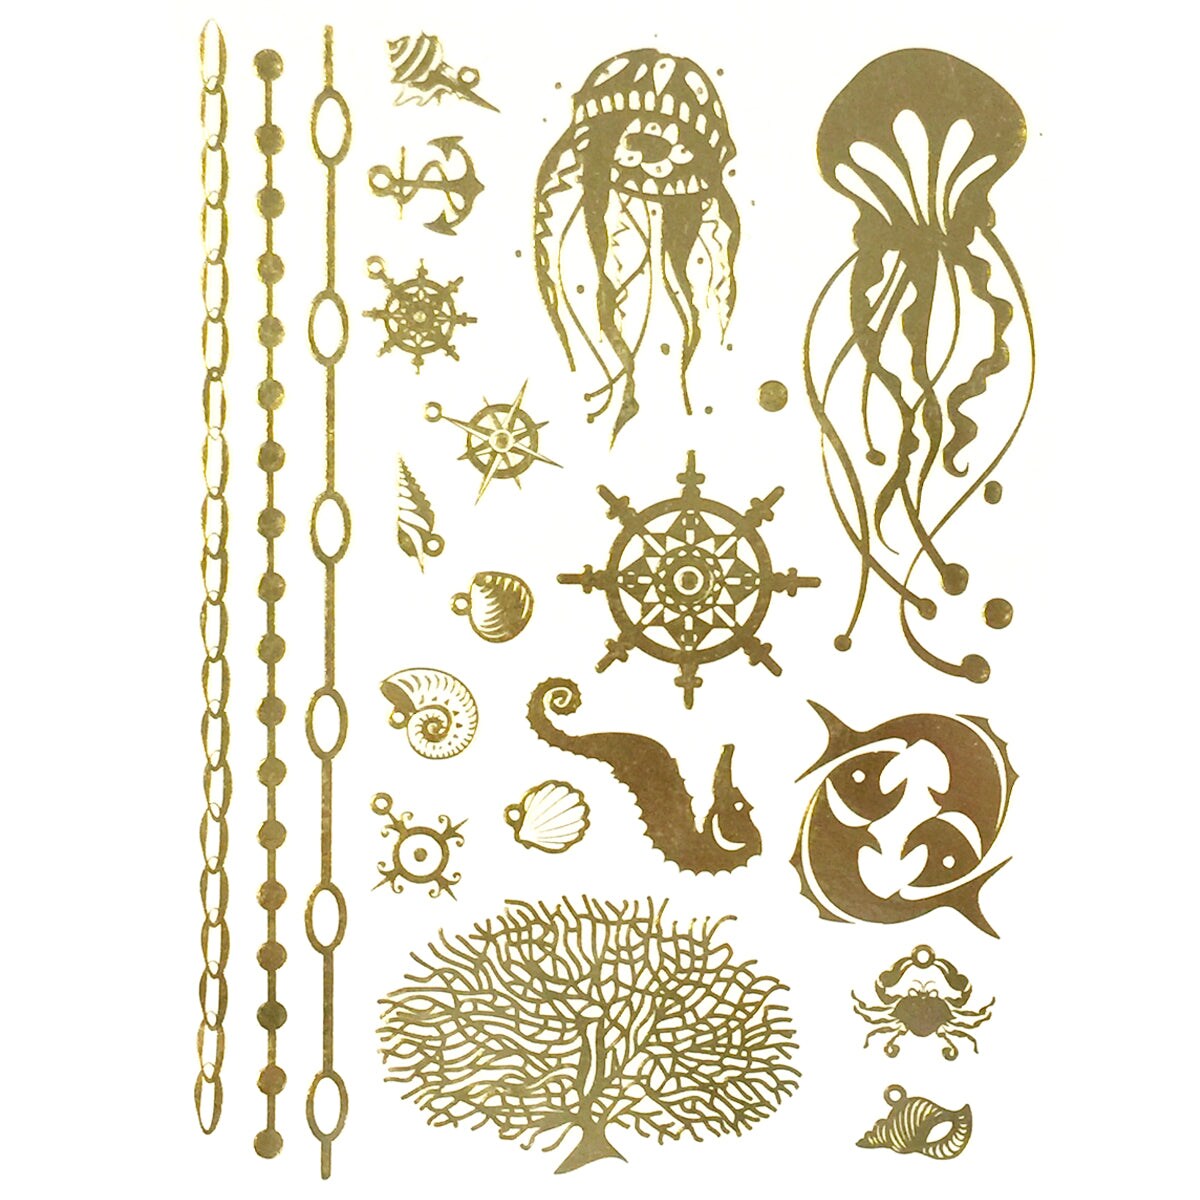 Wrapables Celebrity Inspired Temporary Tattoos in Metallic Gold Silver and Black, Sea Animals, Large